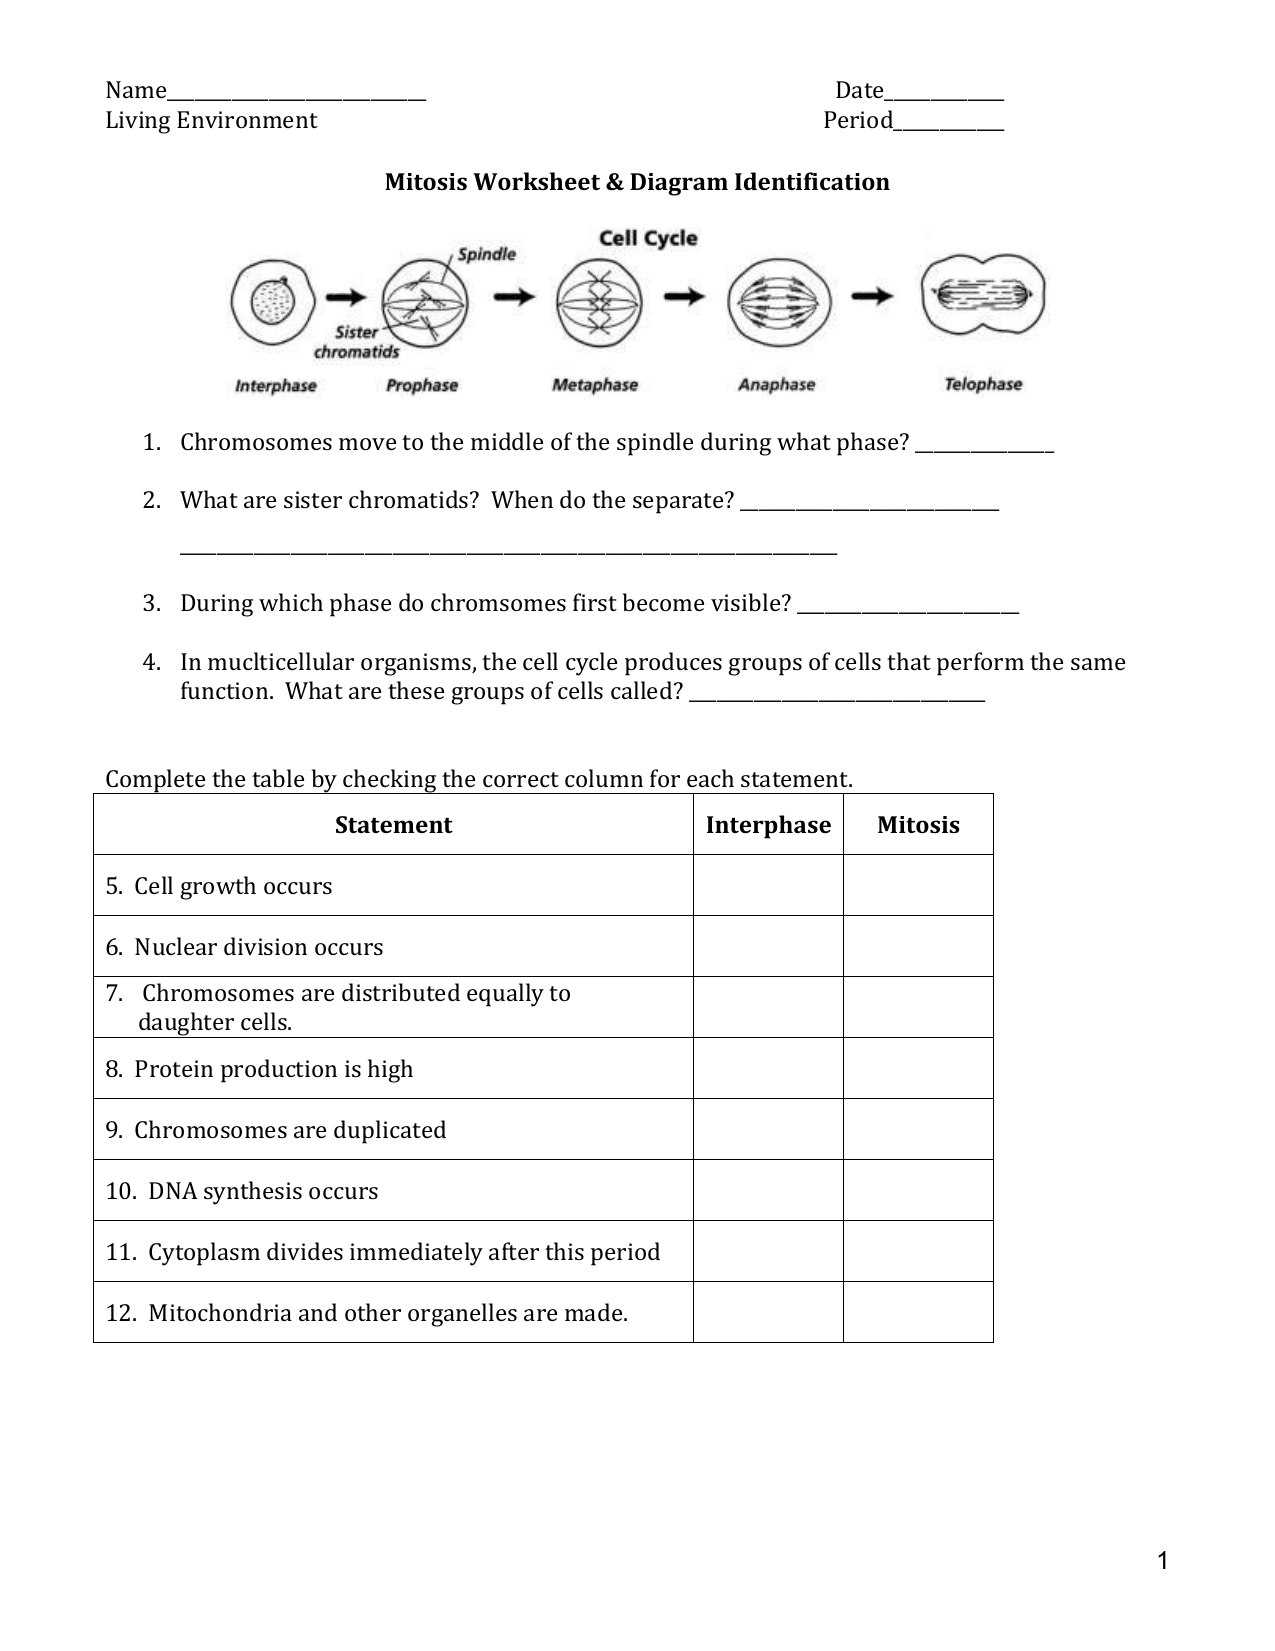 Mitosis Worksheet (11) Inside Cell Cycle Worksheet Answers